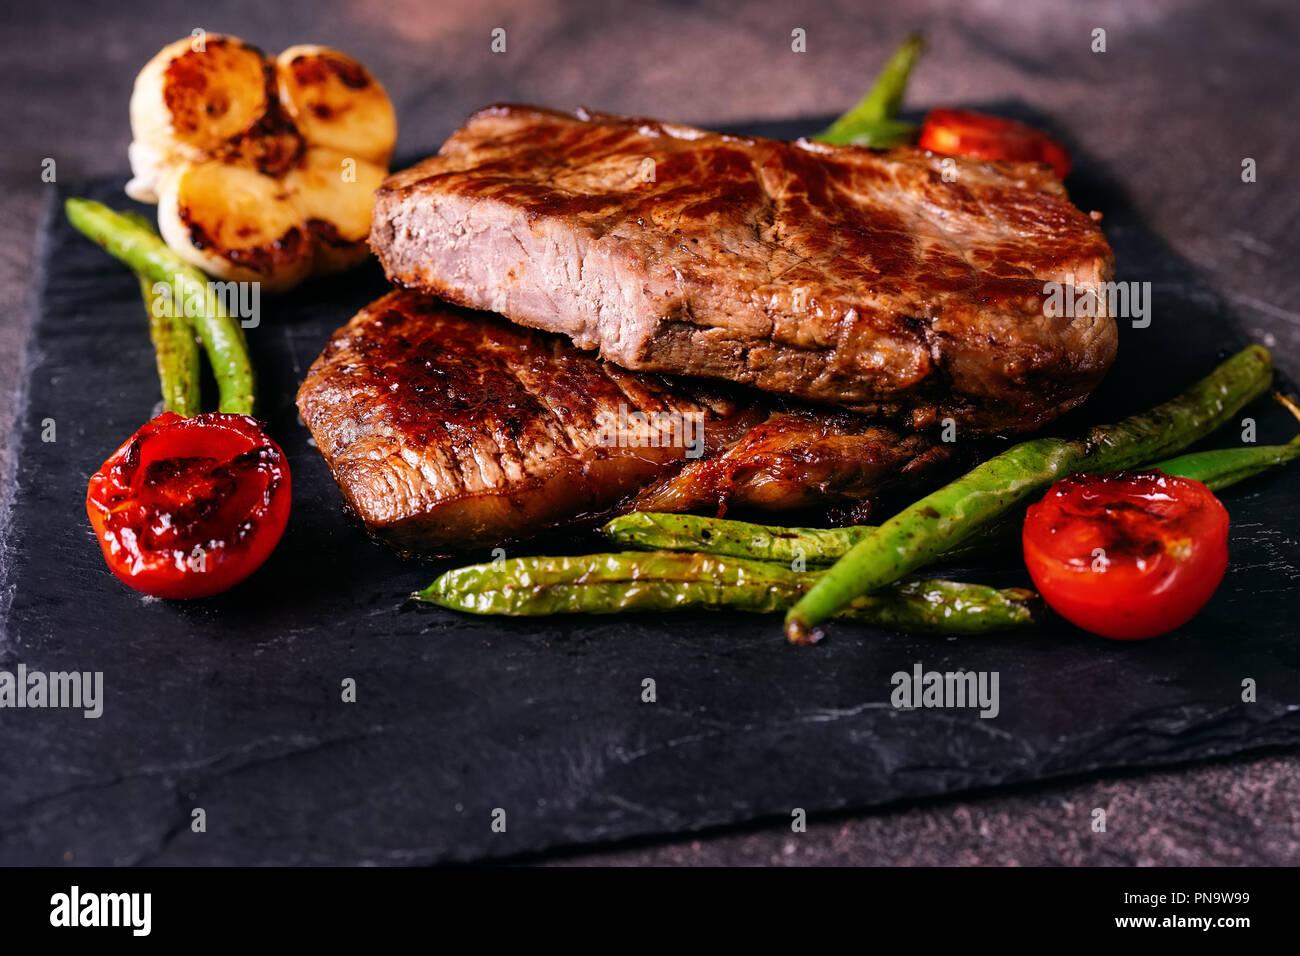 Prepared delicious beaf steaks with vegetables on slate plate. Close up. Stock Photo